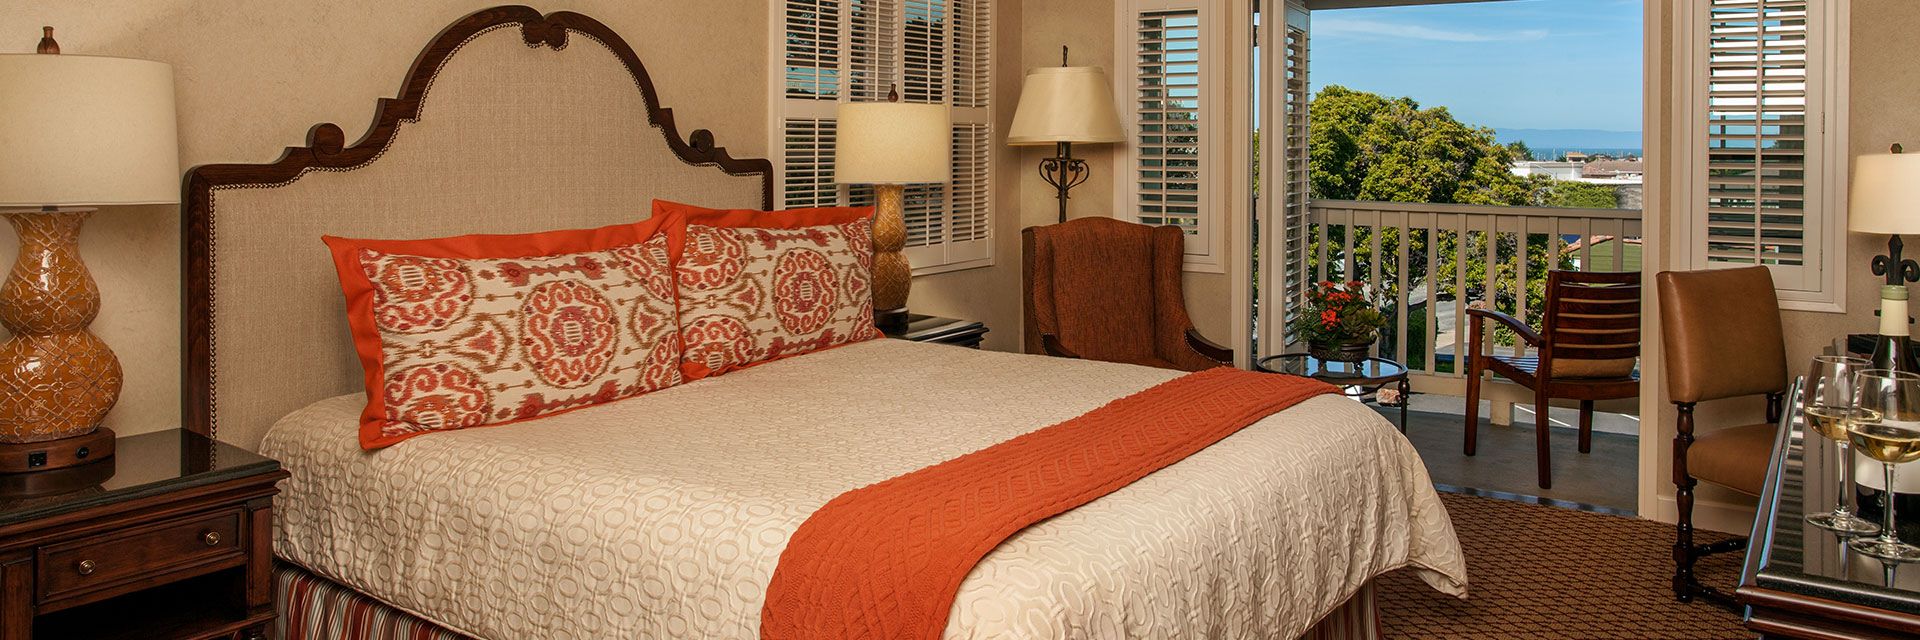 Rooms and suites at Casa Munras Garden Hotel & Spa, Monterey